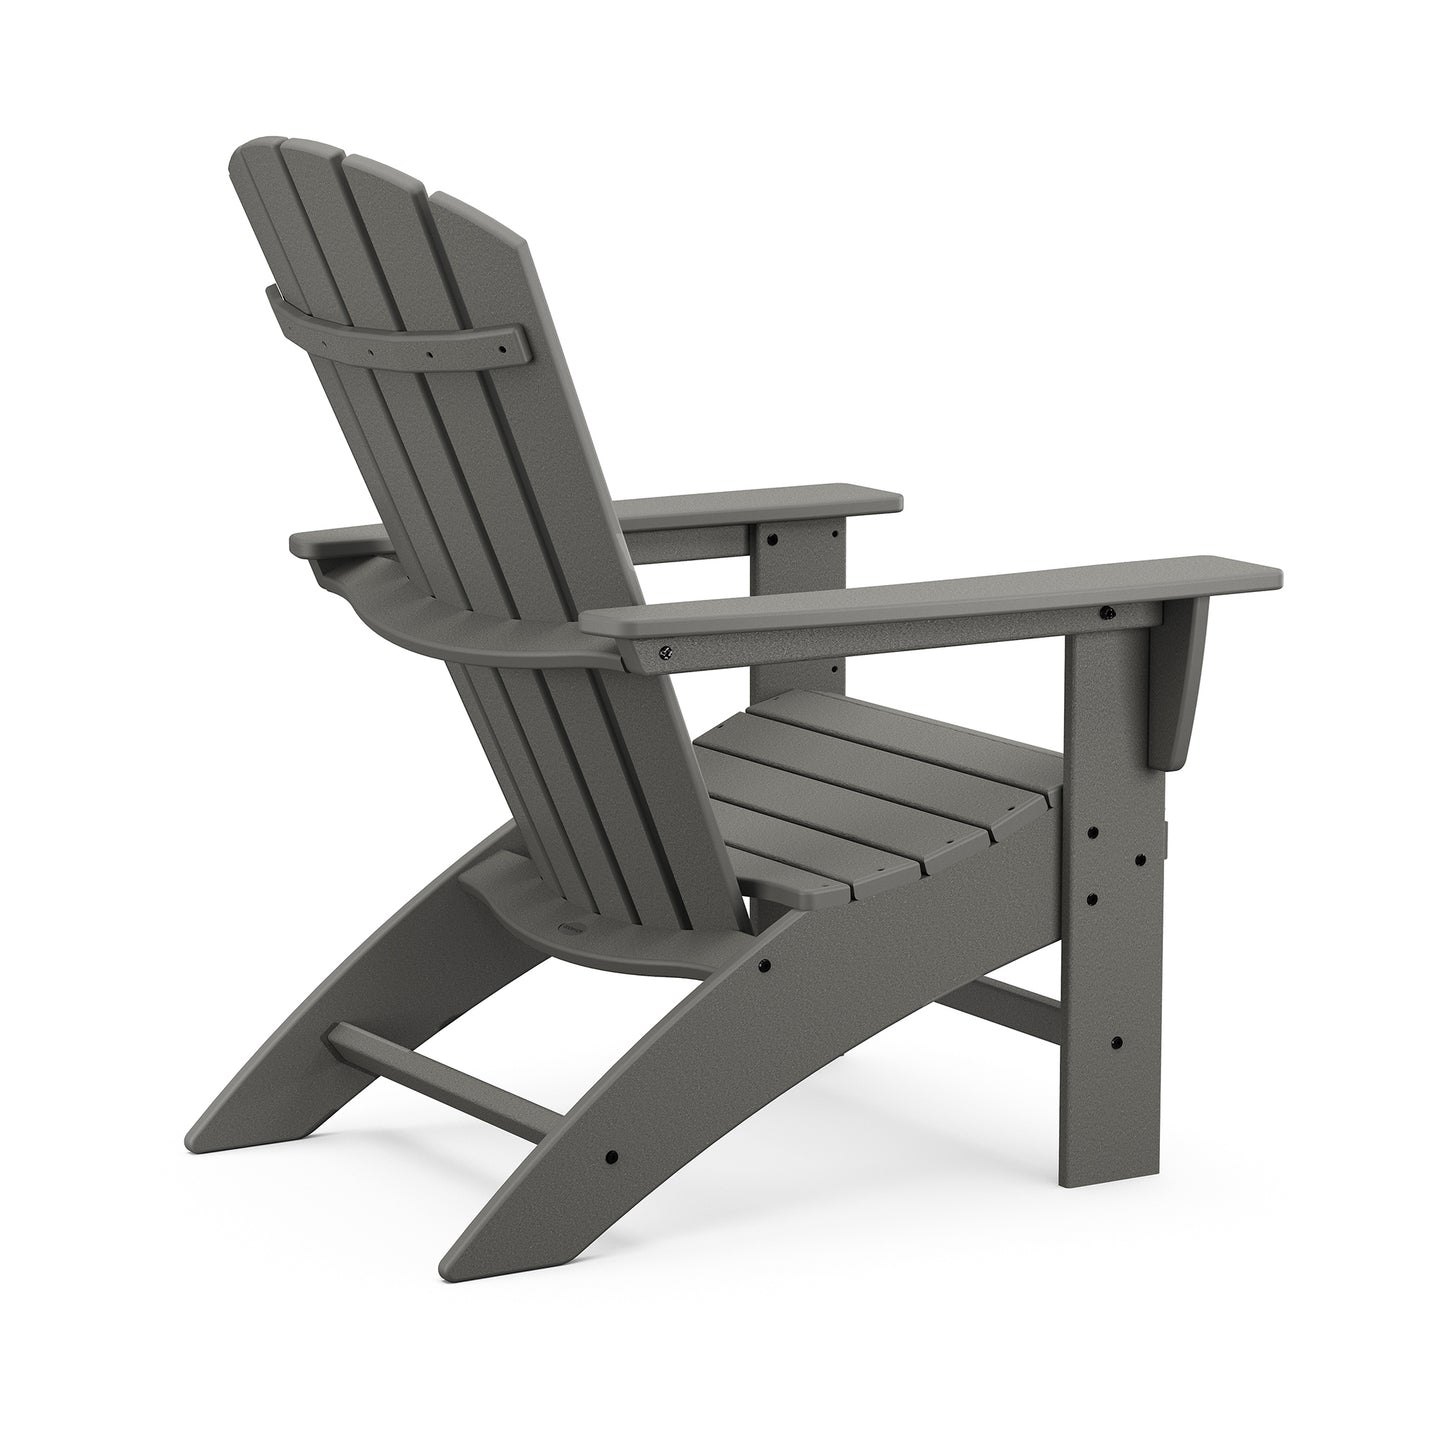 A gray POLYWOOD Nautical Curveback Adirondack Chair made of synthetic materials, featuring a slatted design with wide armrests, positioned on a plain white background.